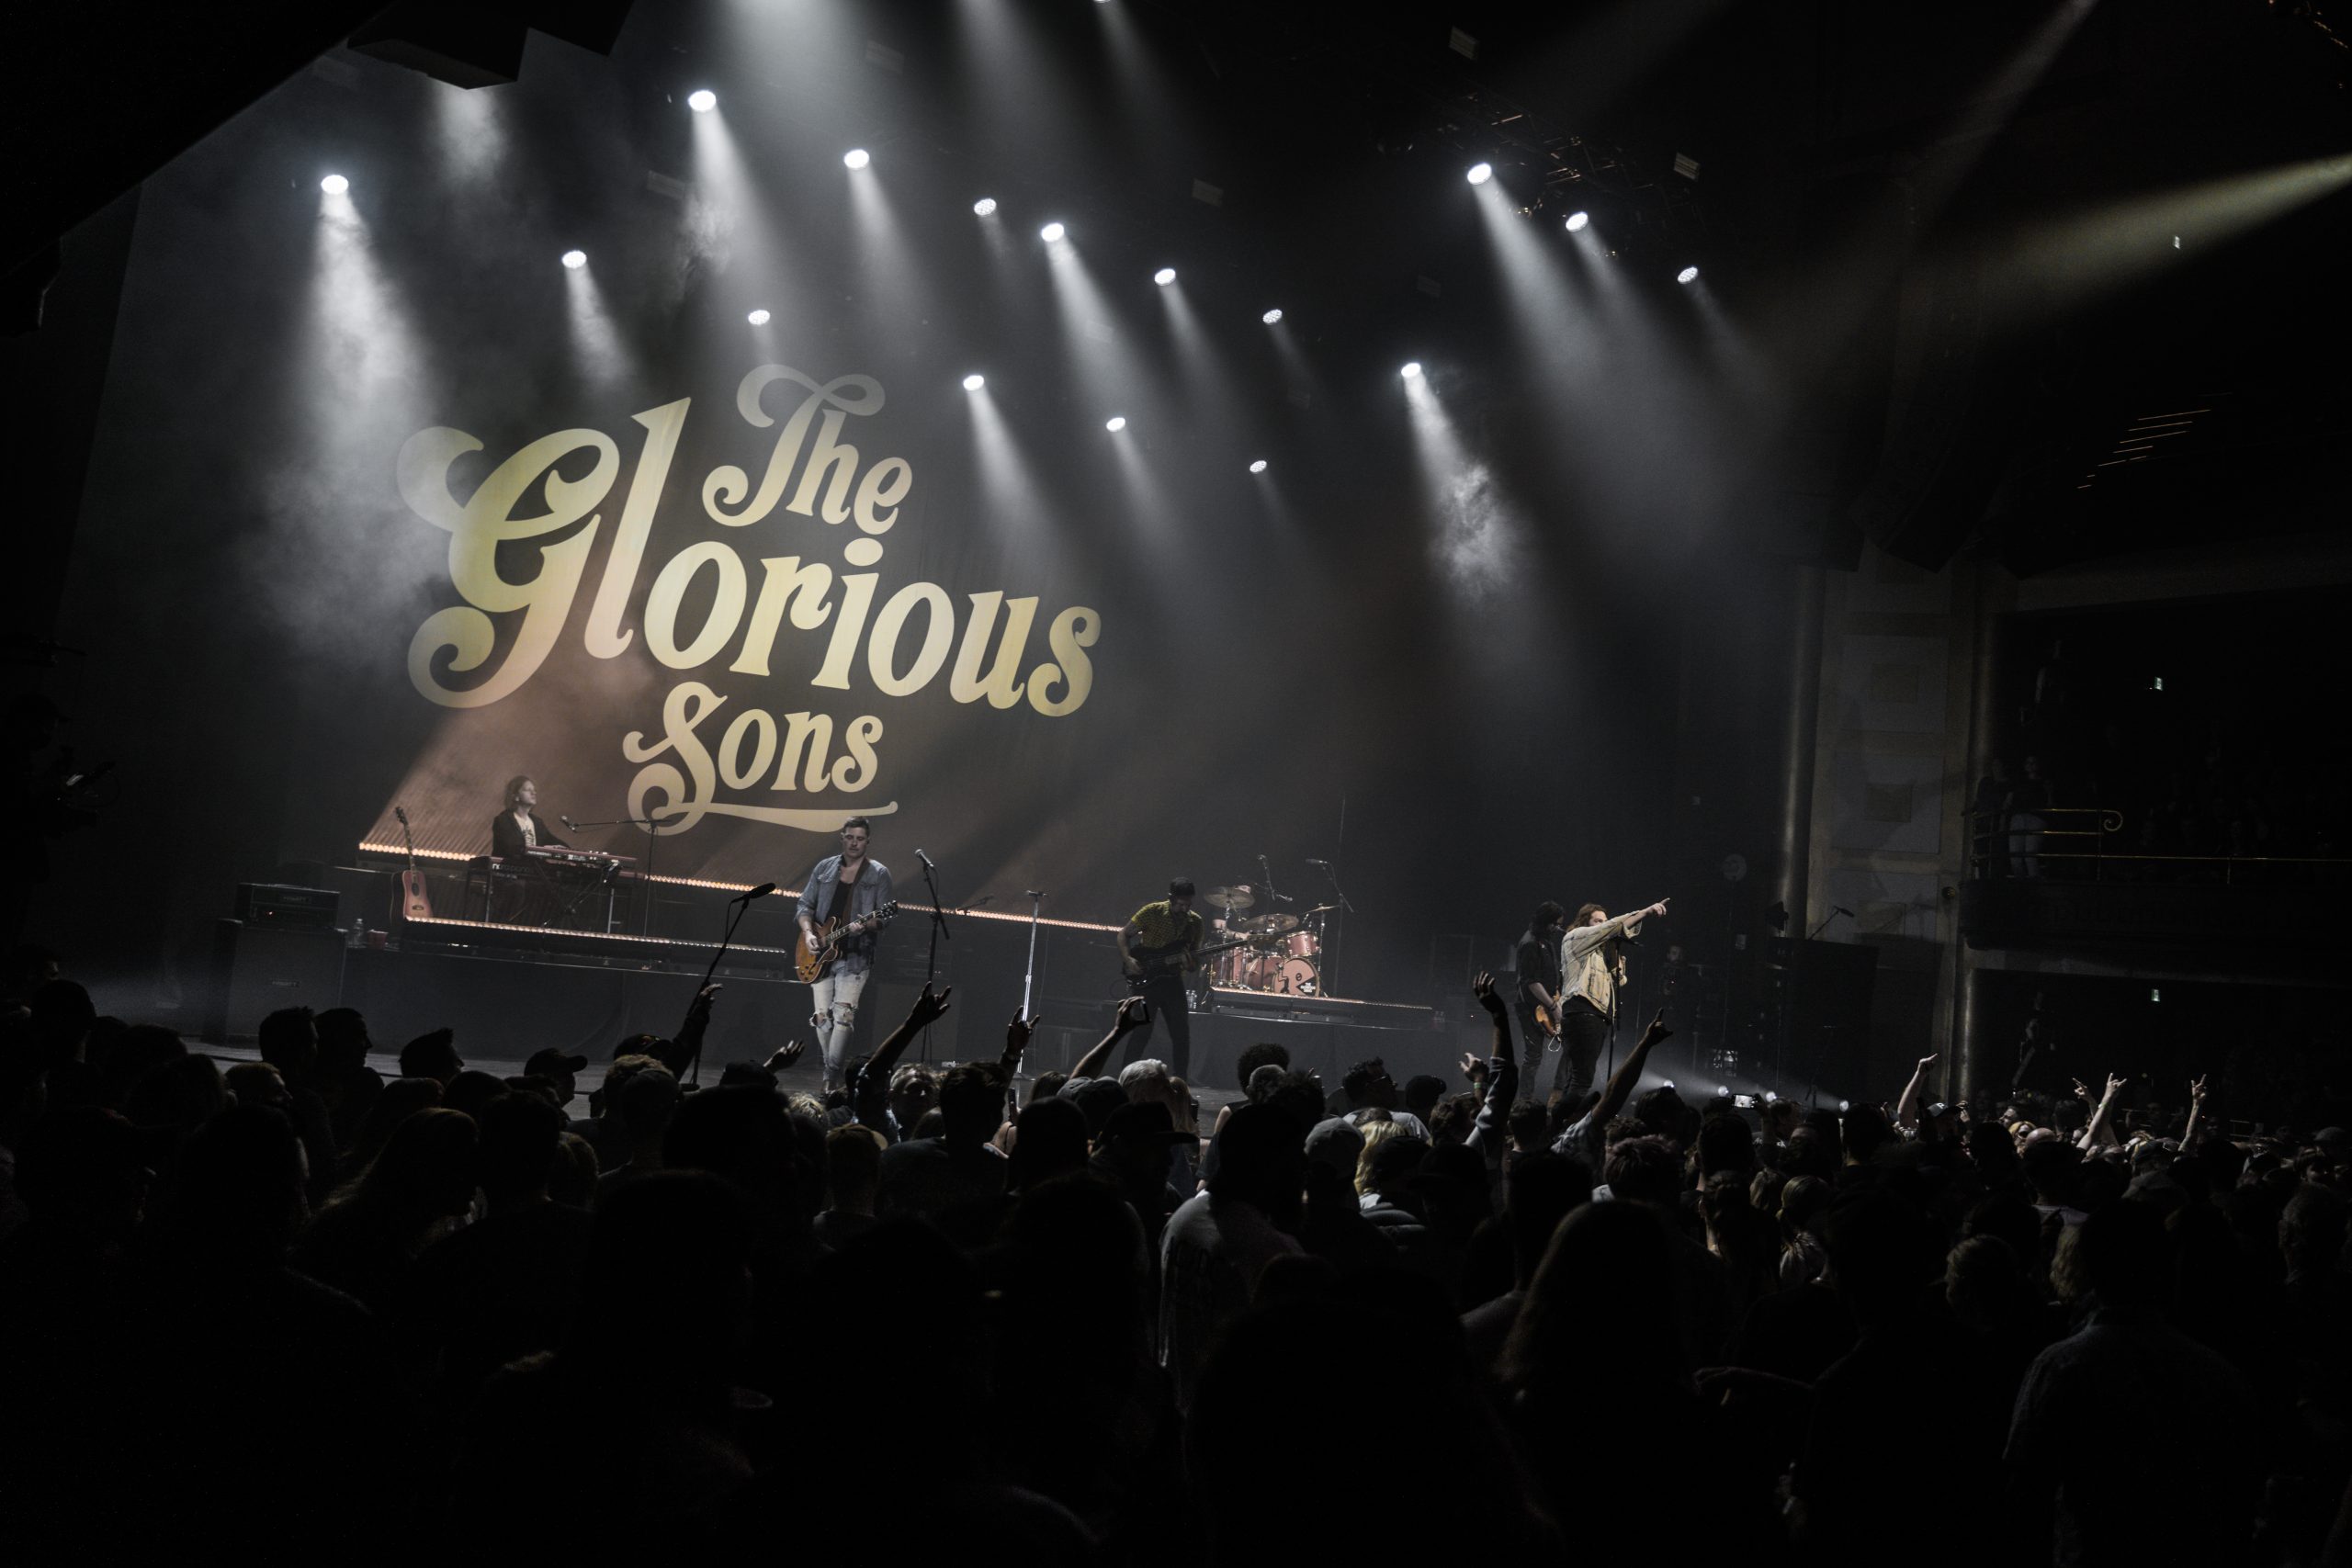 VIDEO: Canadian Rock Band The Glorious Sons Play Live In Toronto